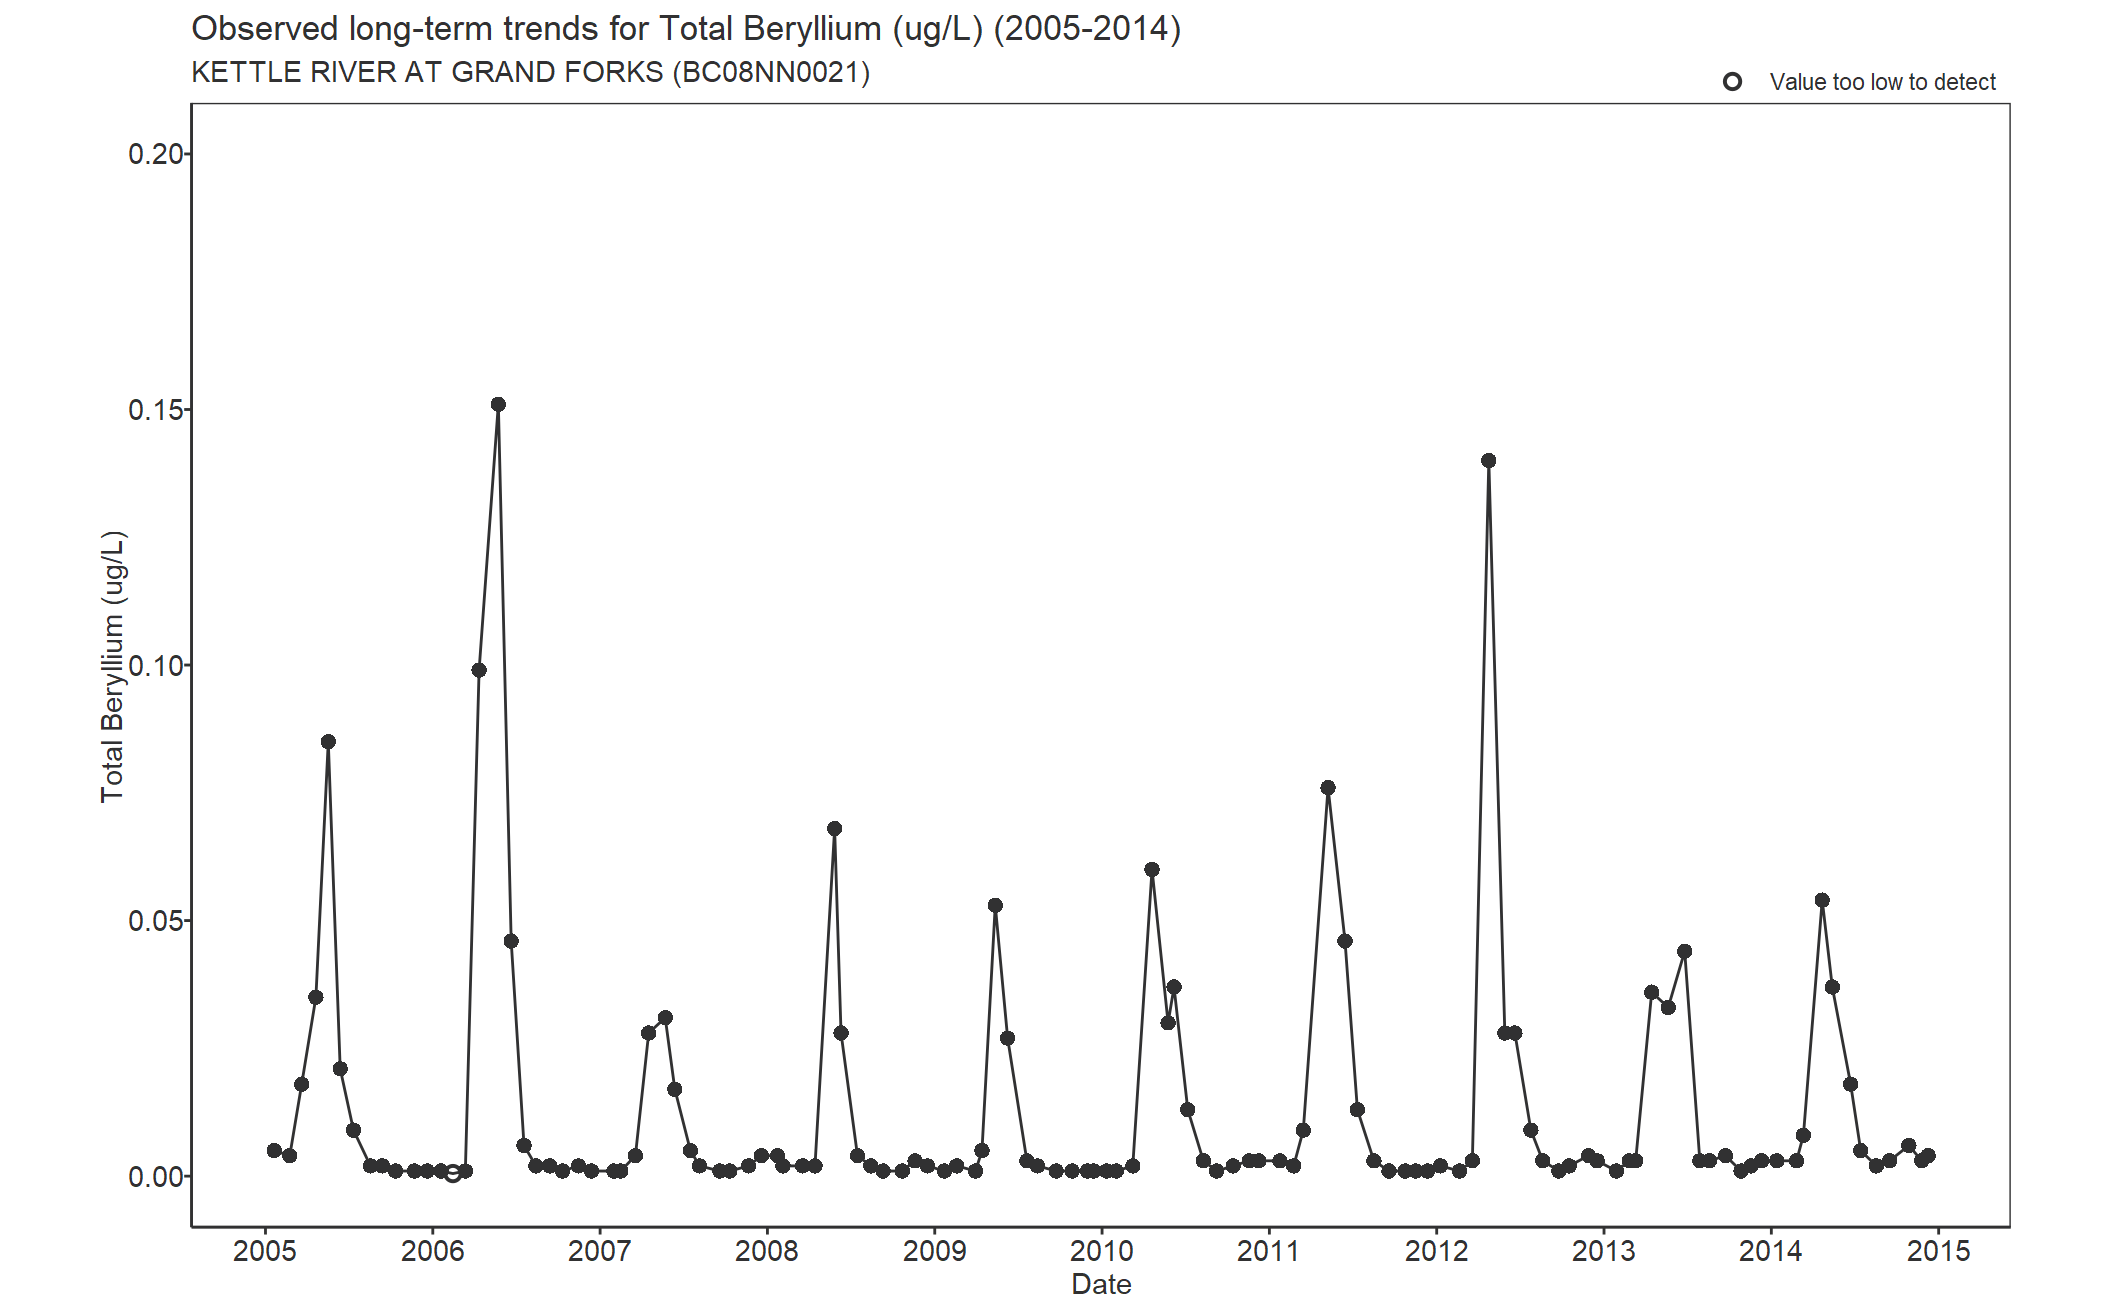 Observed long-term trends for Beryllium Total (2005-2014)